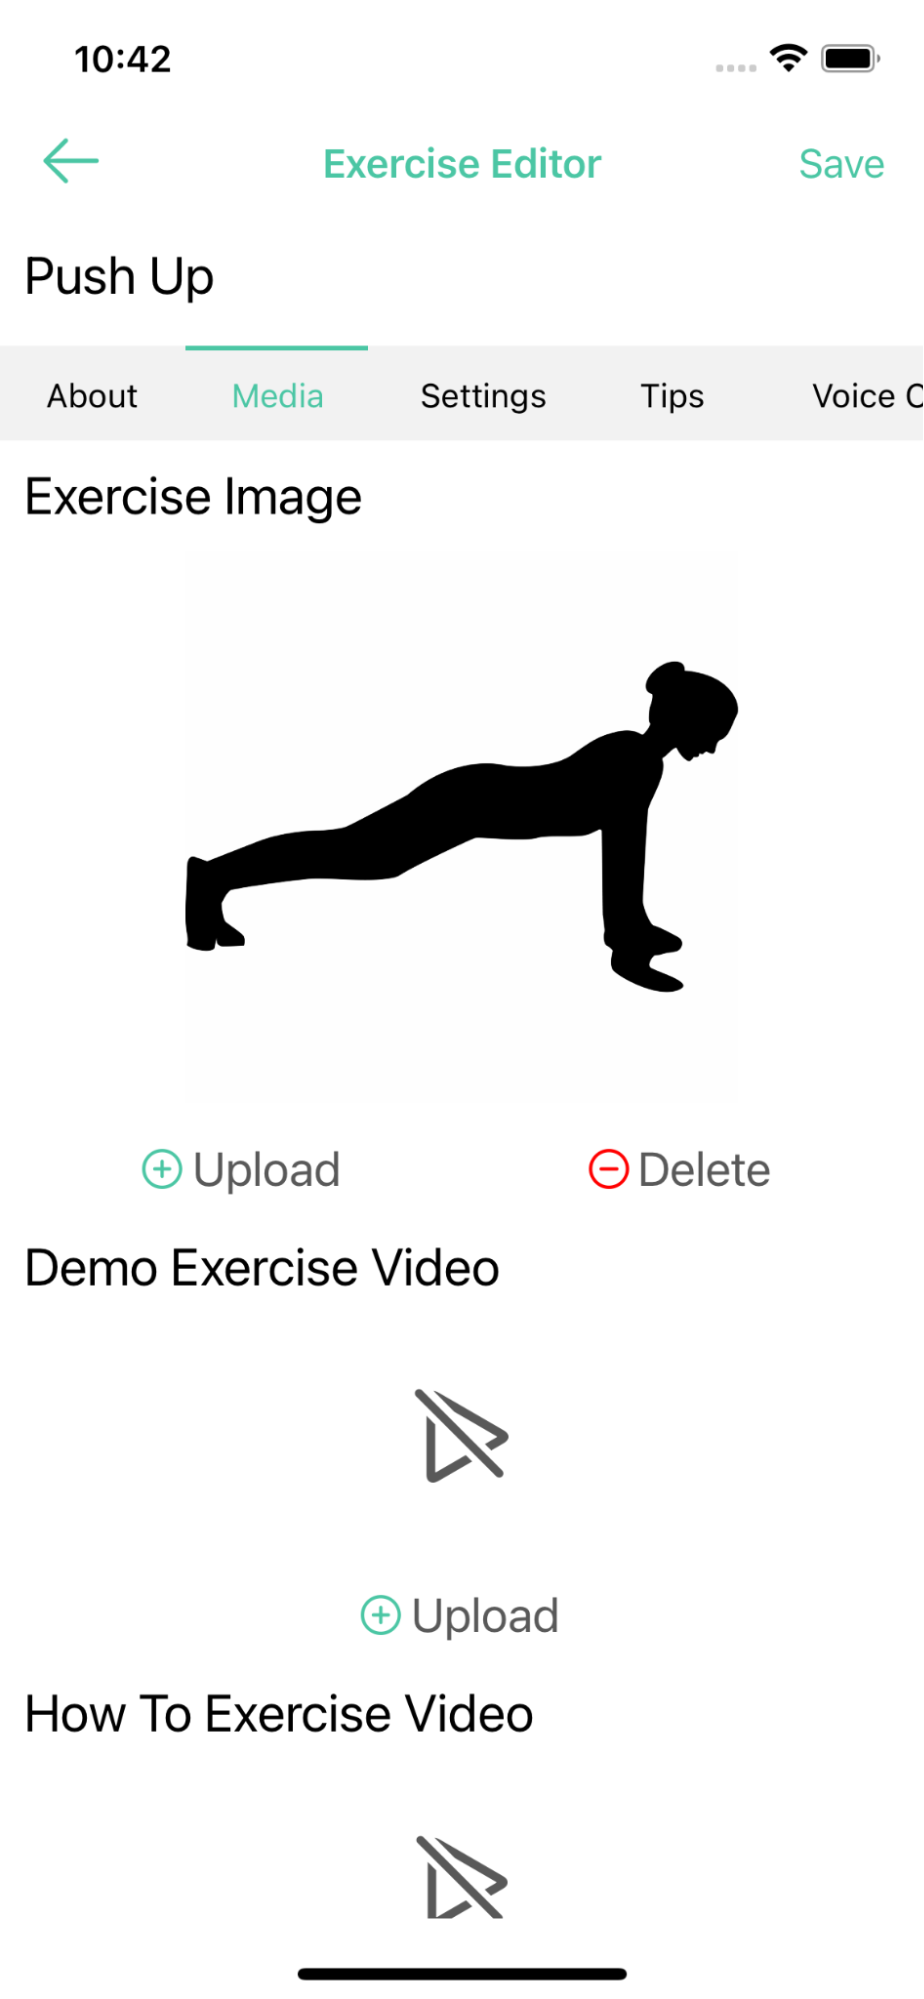 How you can upload your own image for your exercise